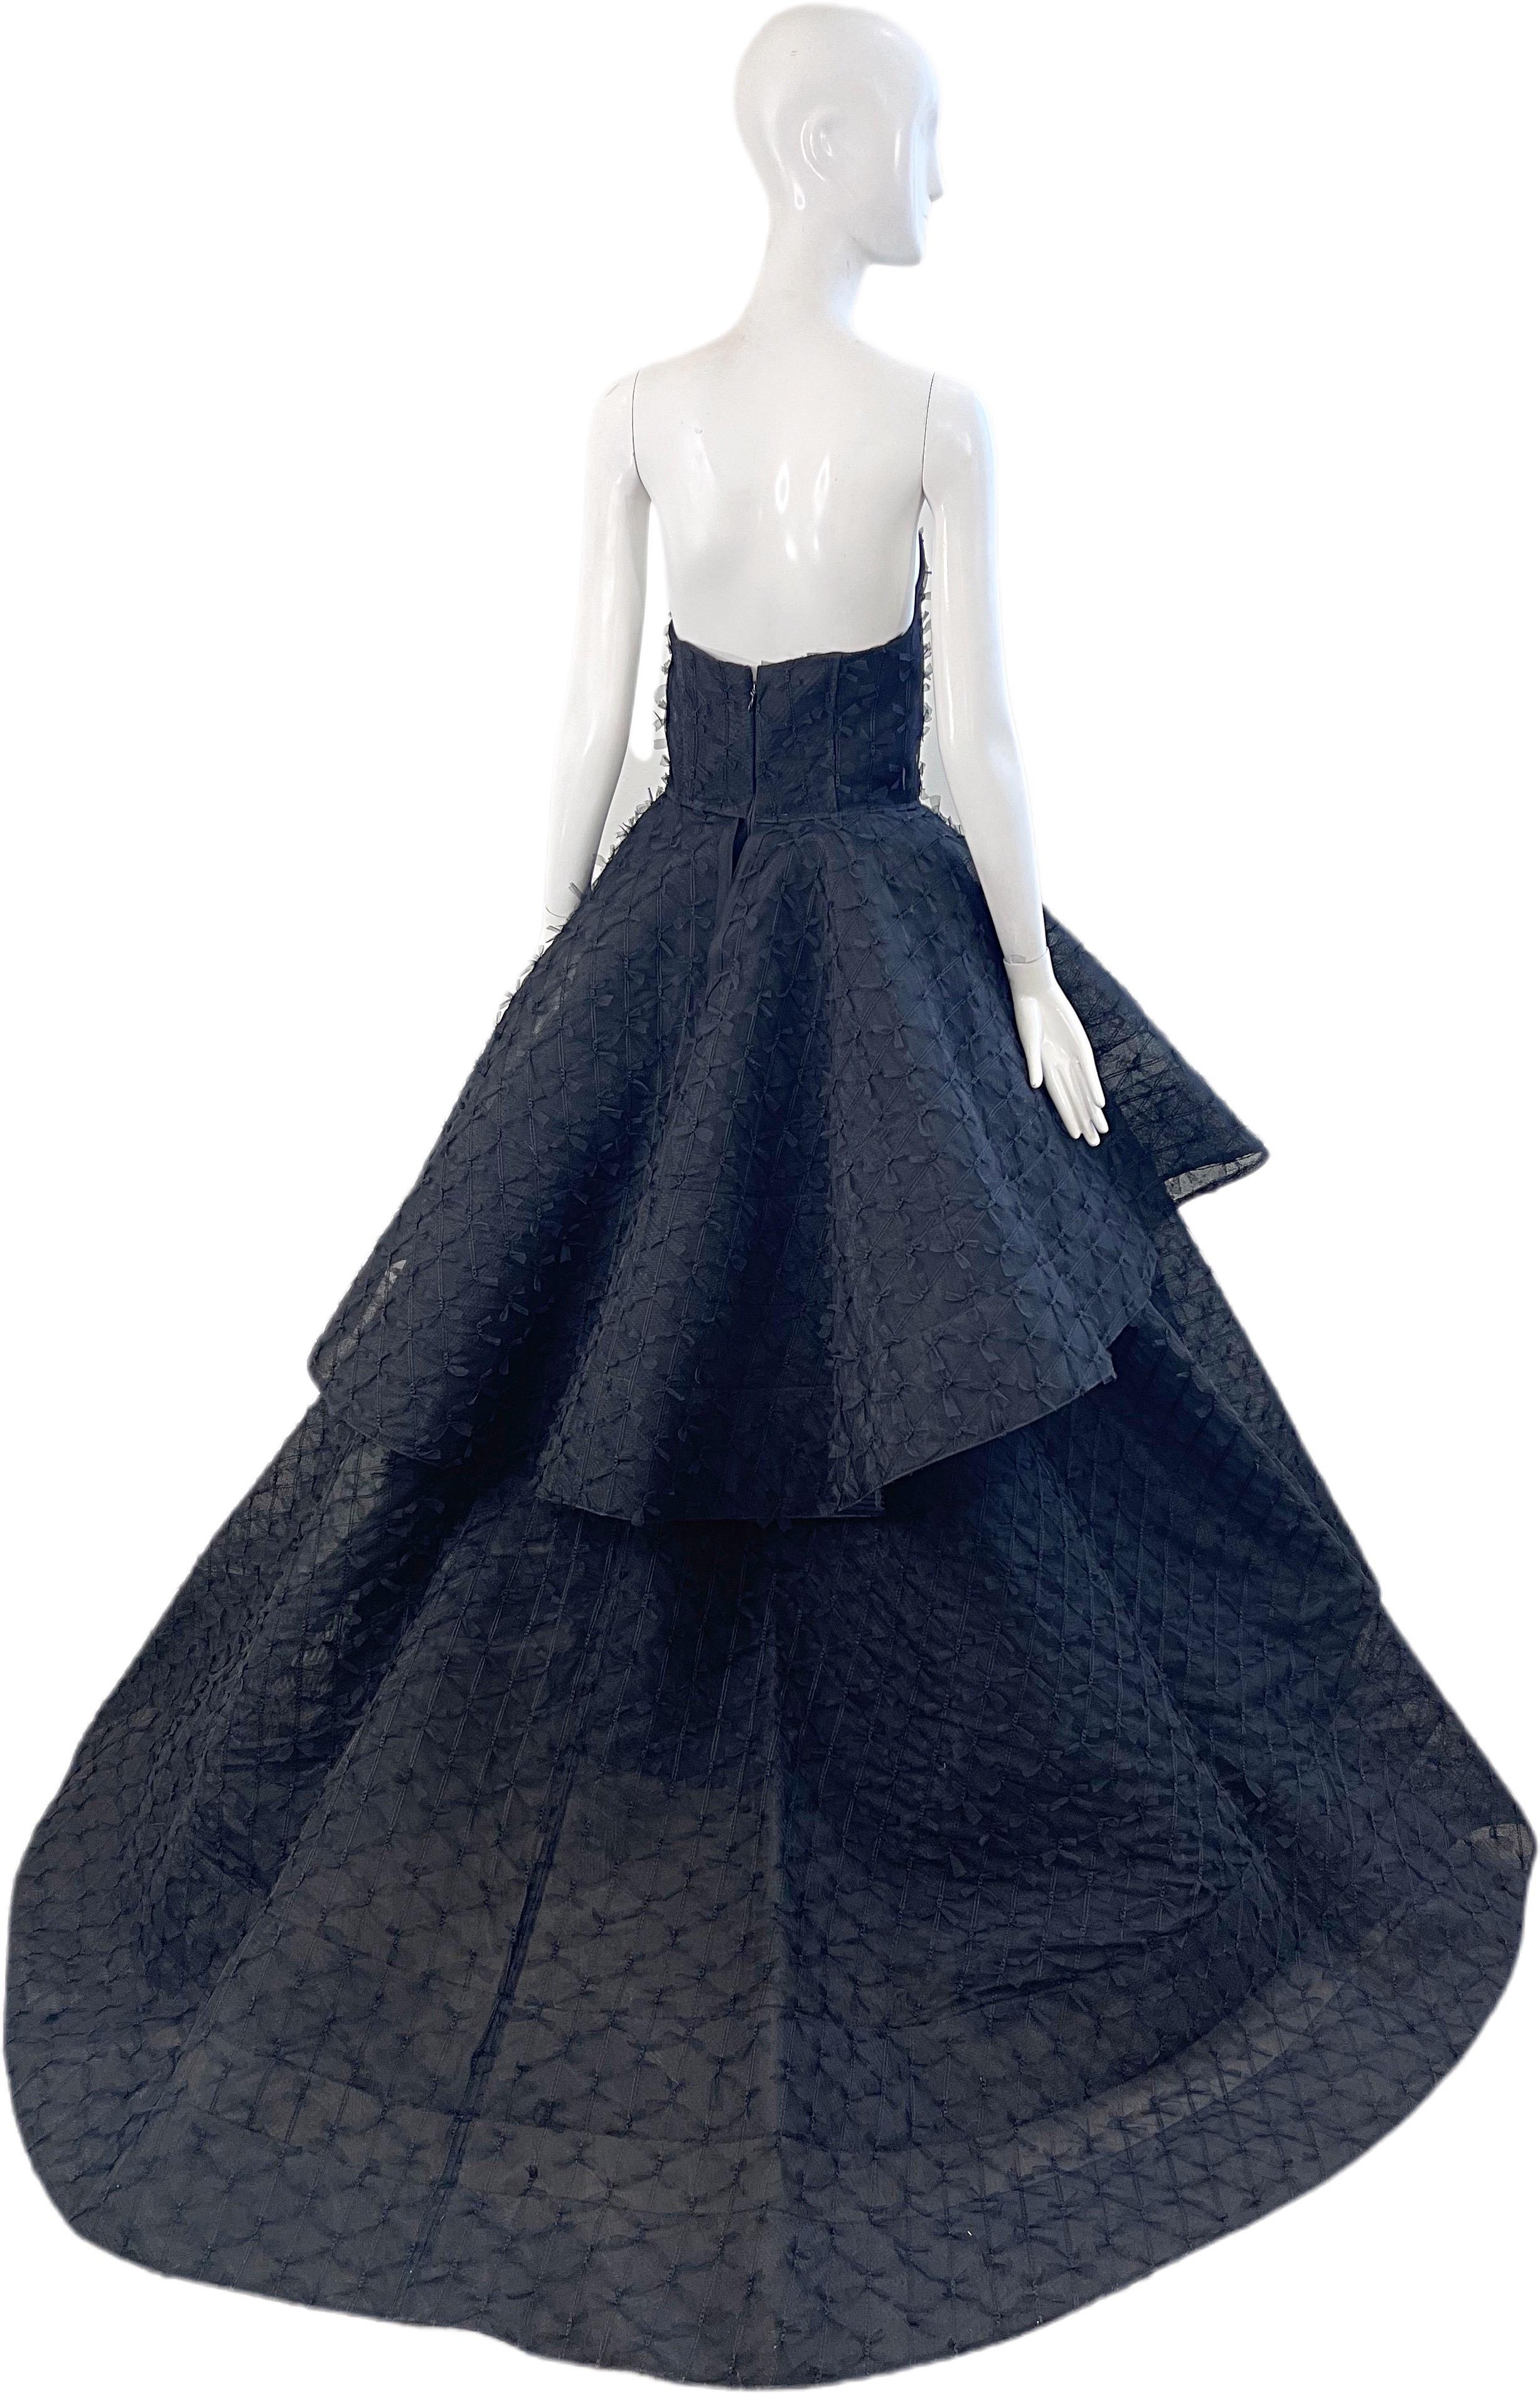 Christian Siriano Couture Spring 2019 Runway Size 4 / 6 Black Horsehair Gown In Excellent Condition For Sale In San Diego, CA